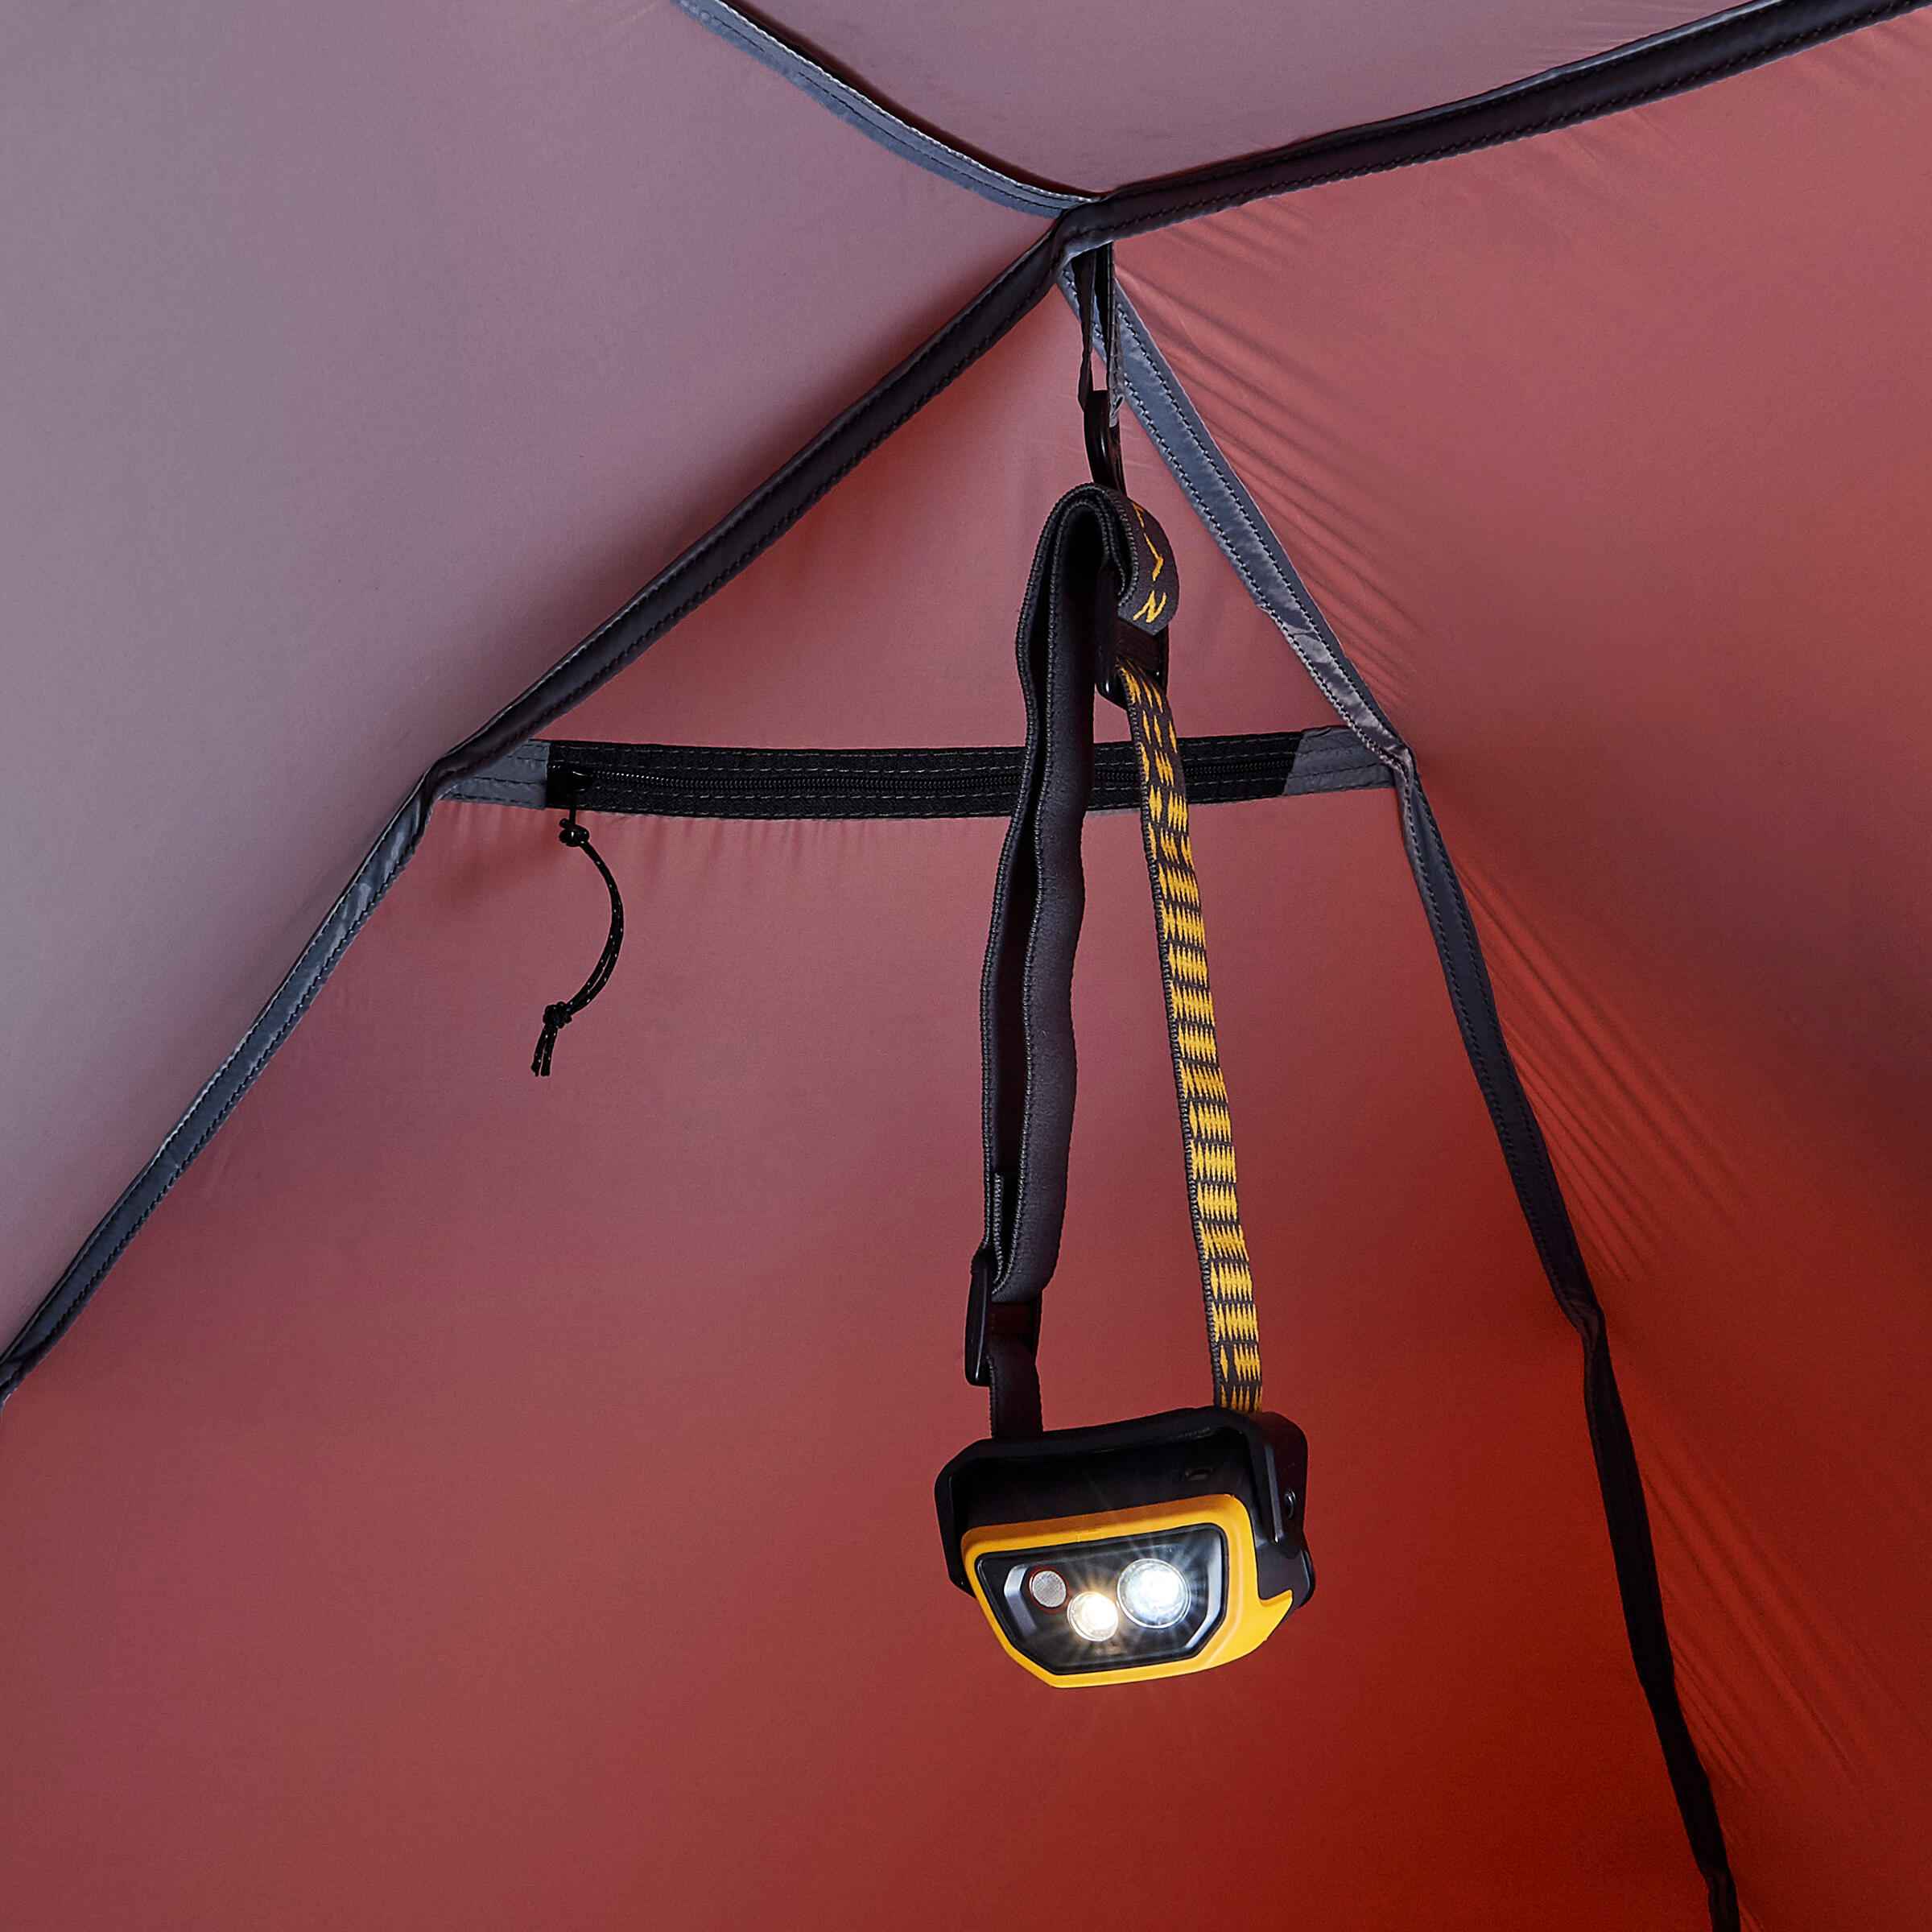 2-person mountaineering tent - Makalu T2 11/14